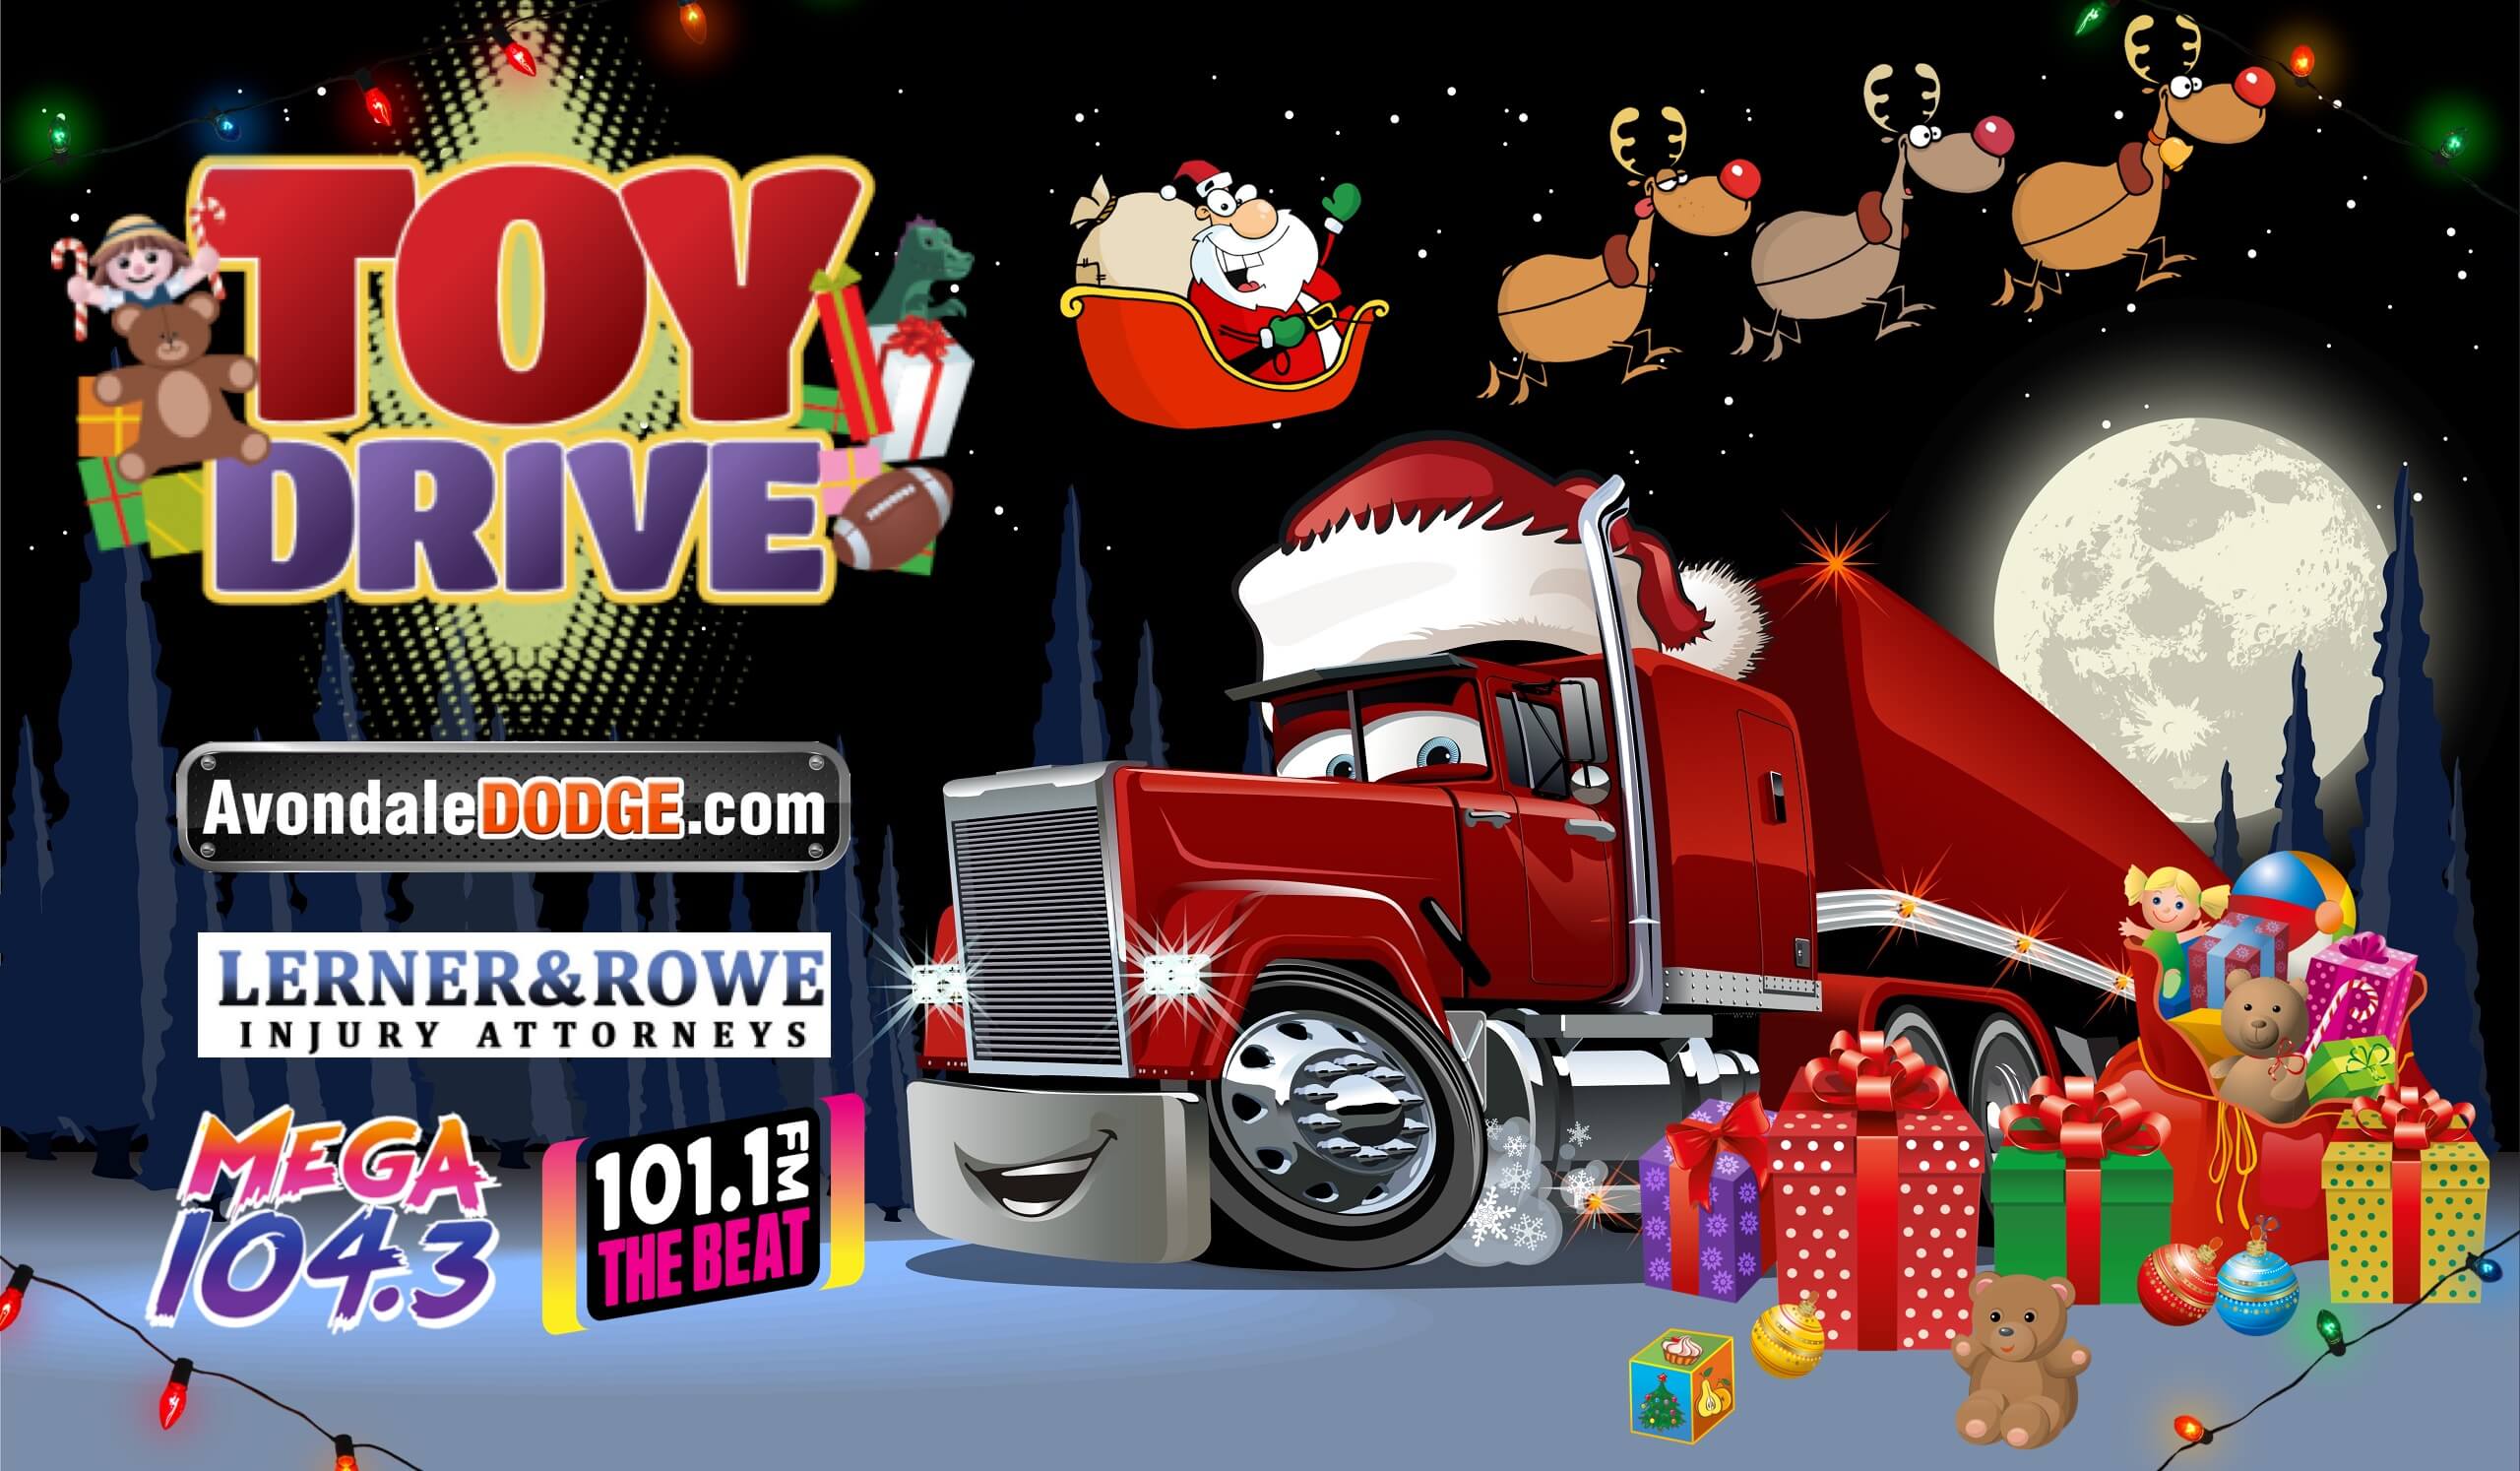 LRIA Holiday toy drive